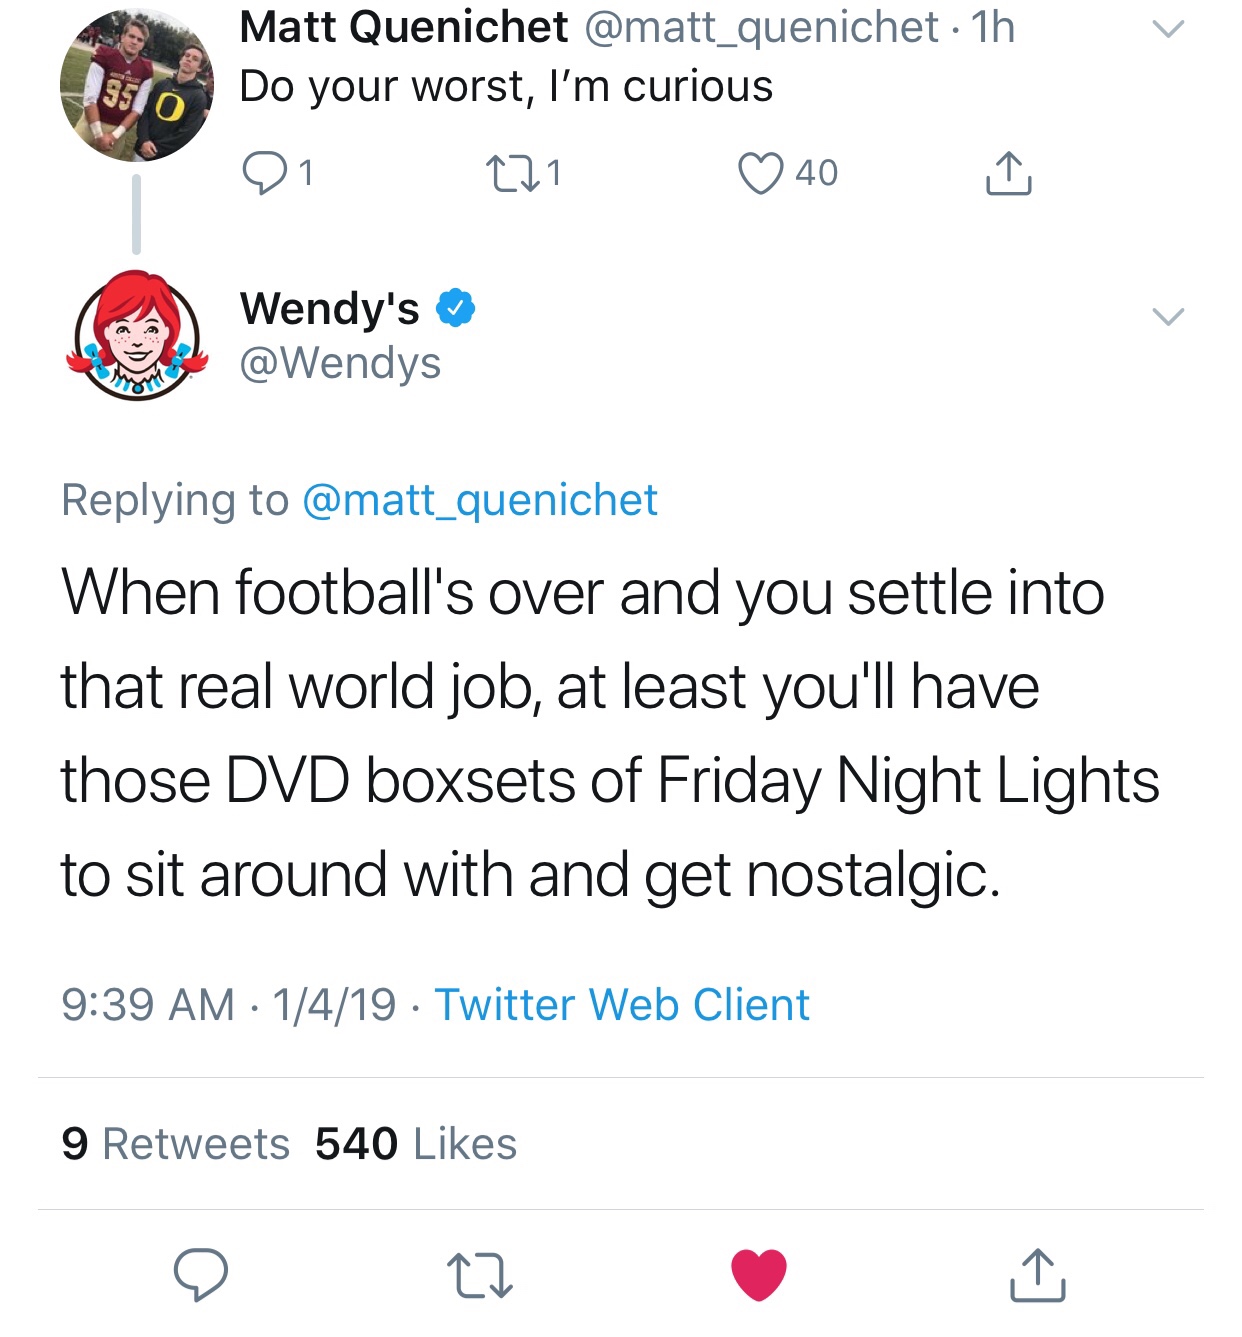 tweet - wendy's company - Matt Quenichet 1h Do your worst, I'm curious 01 271 40 1 Wendy's When football's over and you settle into that real world job, at least you'll have those Dvd boxsets of Friday Night Lights to sit around with and get nostalgic. 14